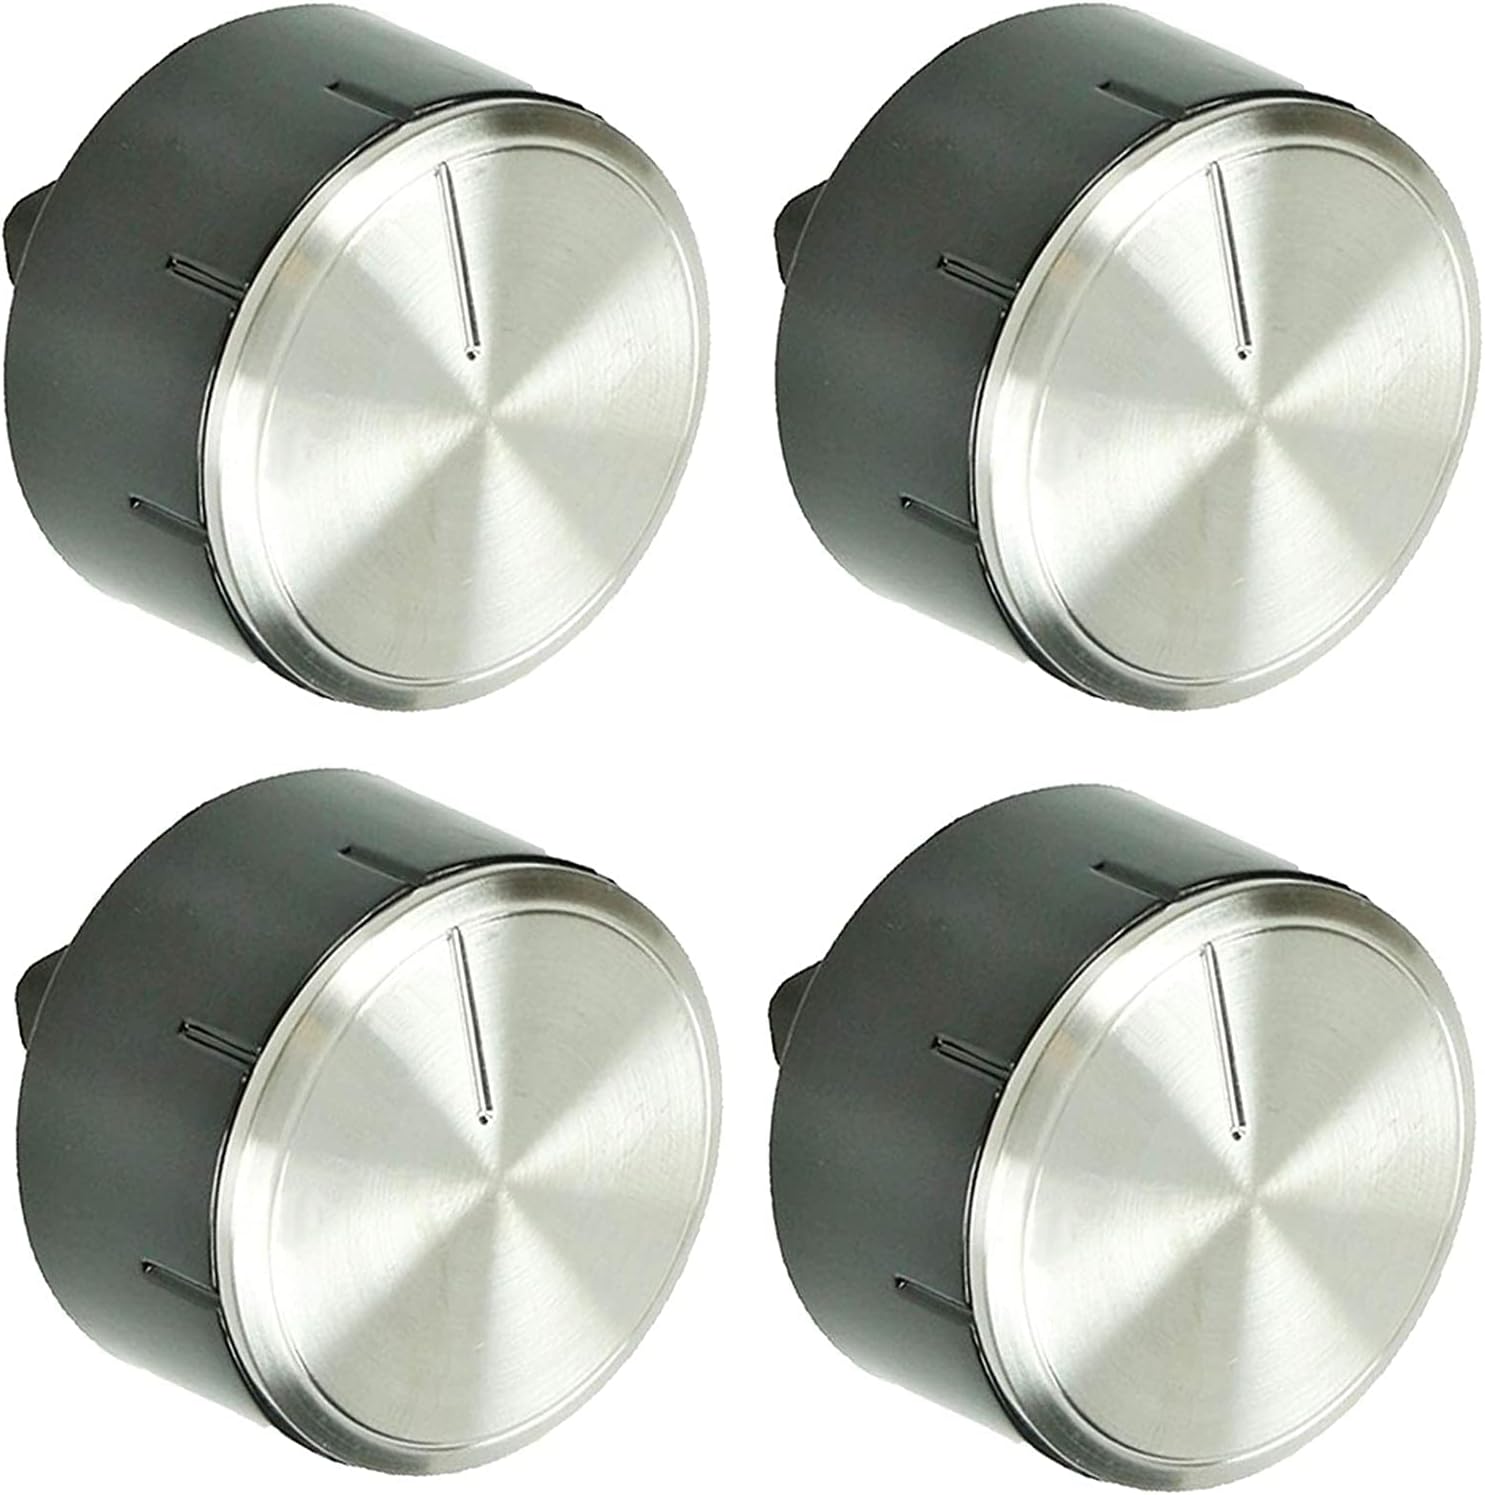 Spares2go Control Knob Switch Button for Bosch Cooker Oven Hob (Pack of 4 Knobs) - Amazing Gadgets Outlet